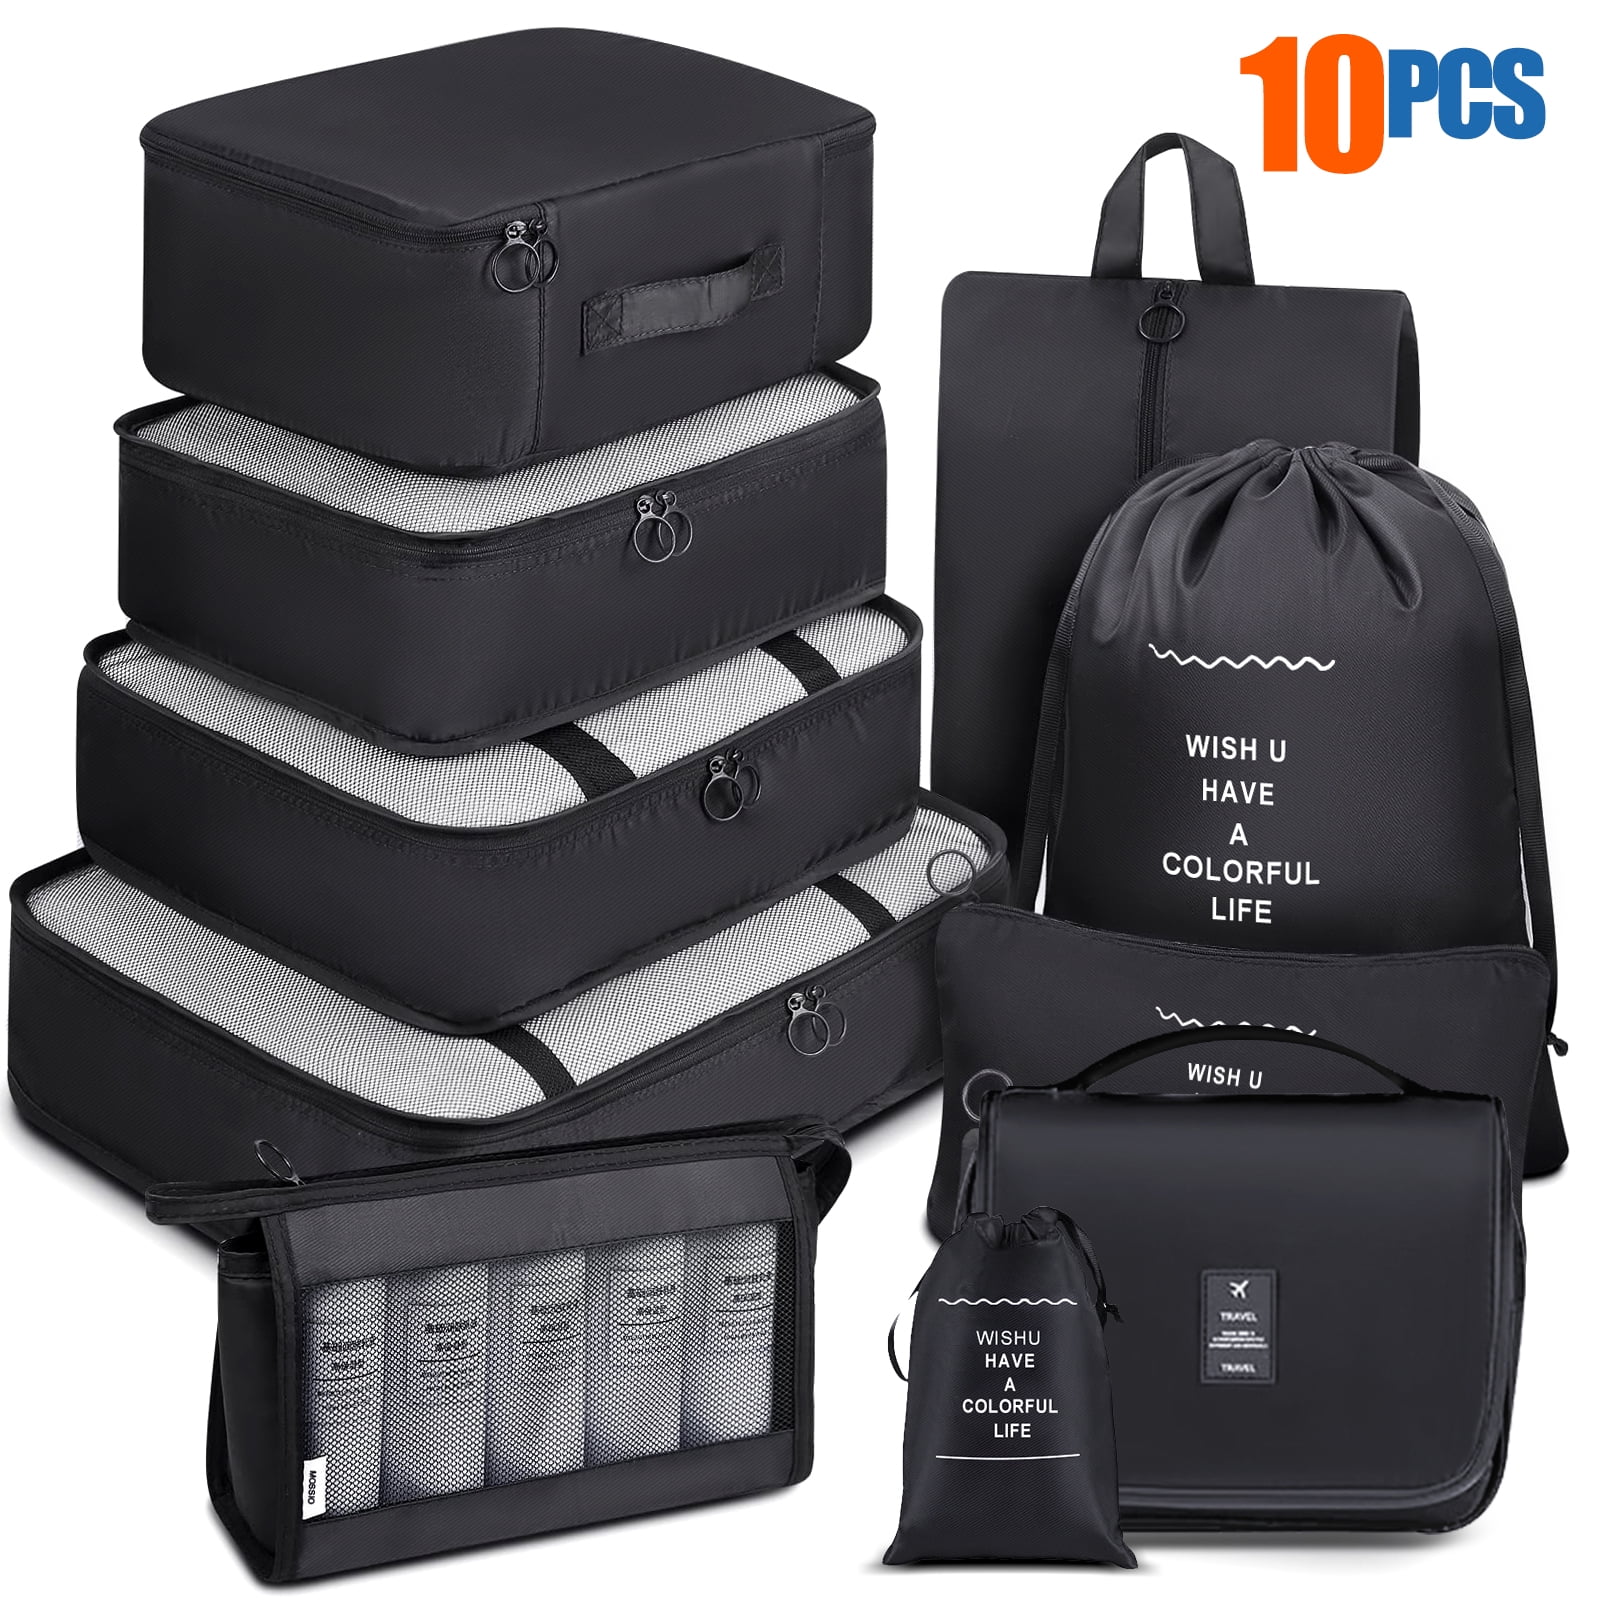 Ifanze 10 Set Packing Cubes for Travel, Travel Essentials Lightweight  Luggage Organizer Storage Bags Set for Travel Accessories, Black